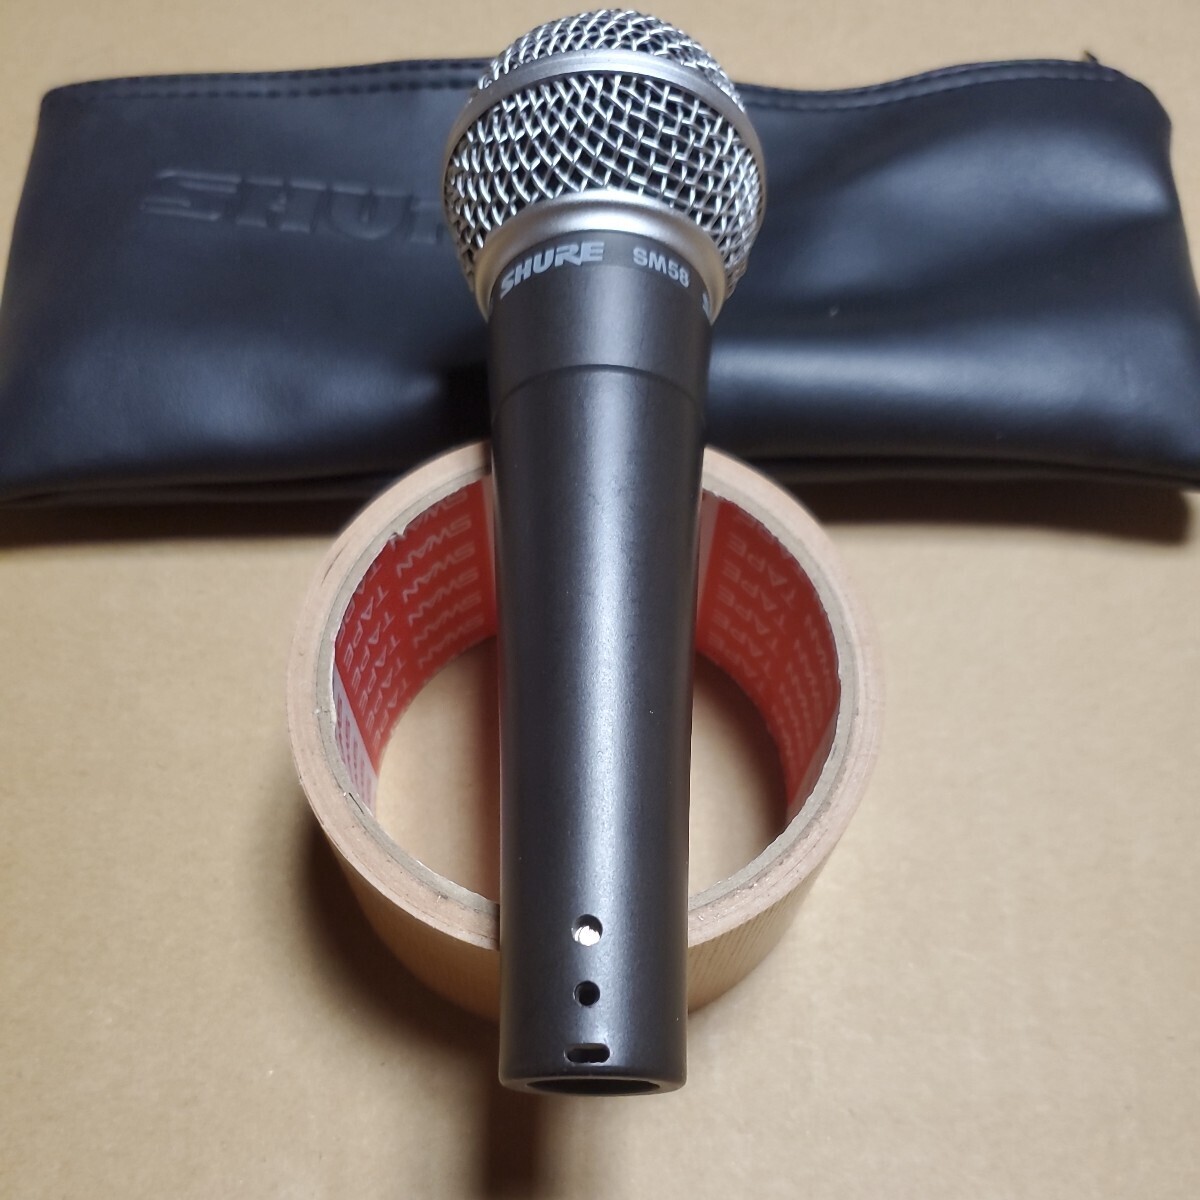  Mike Shure SM58-LCE Vocal for electrodynamic microphone ro phone operation verification ending finest quality beautiful goods ②